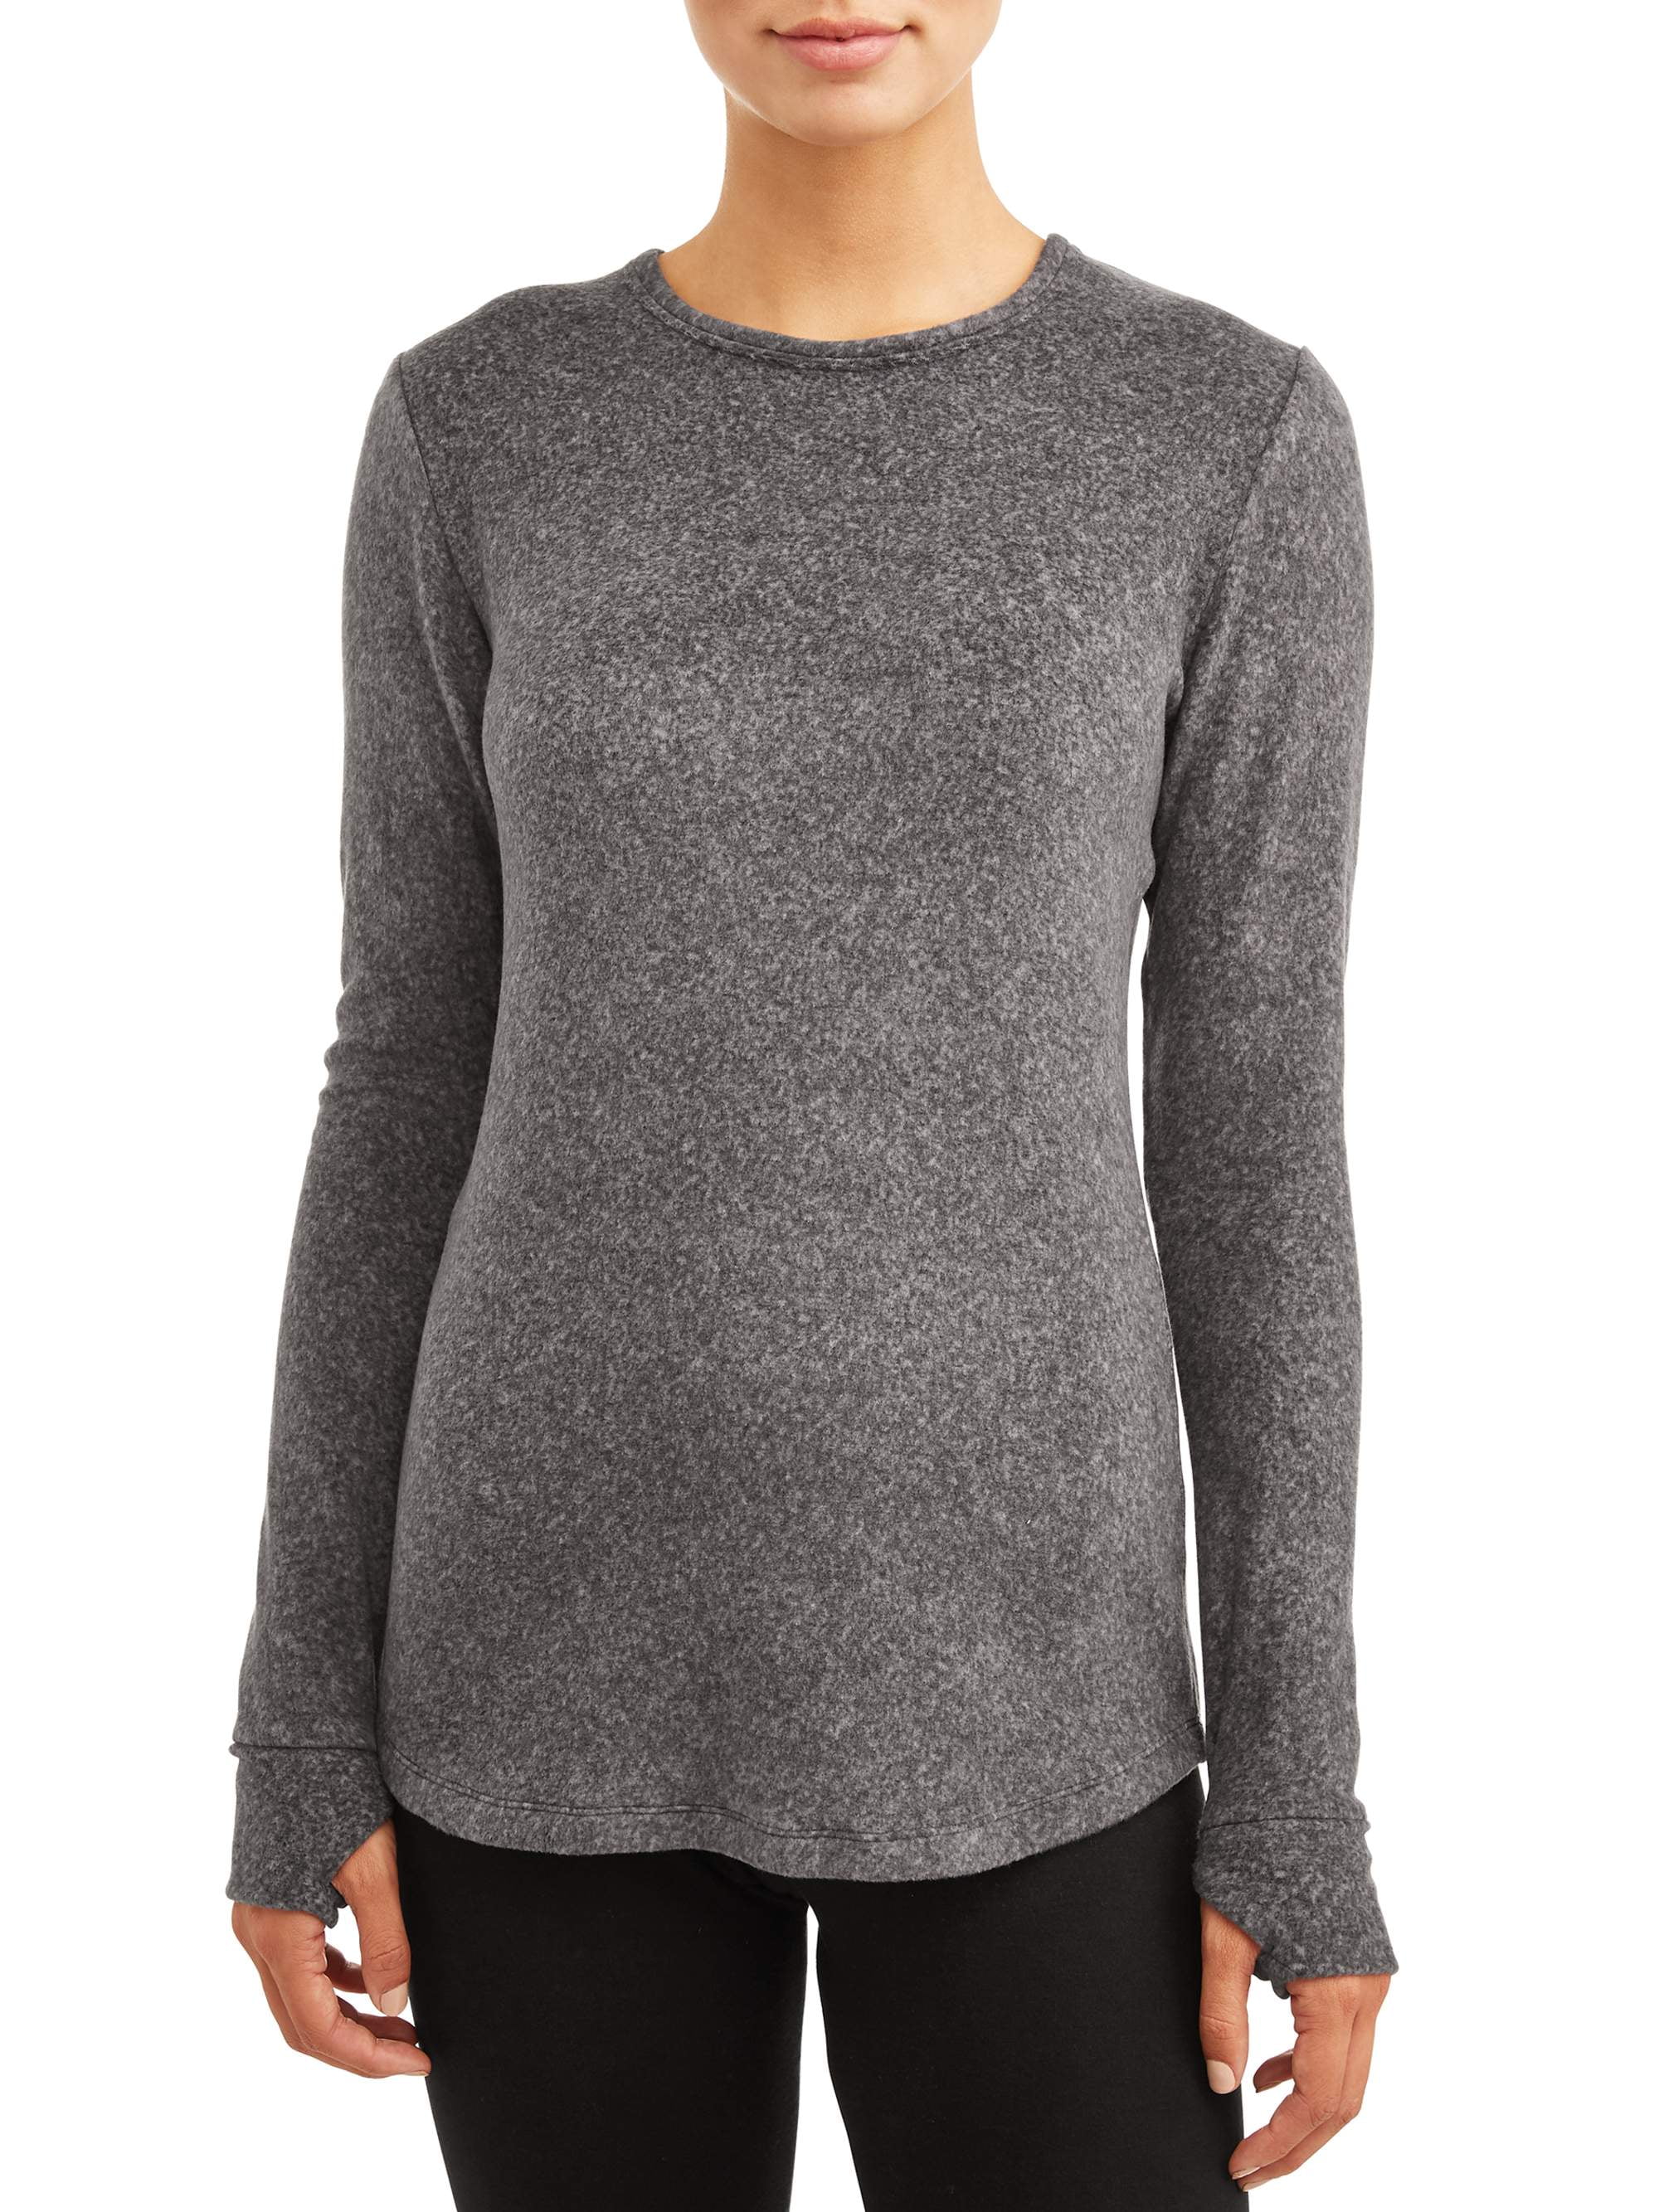 ClimateRight by Cuddl Duds Women's and Women's Plus Stretch Fleece Base  Layer Top 